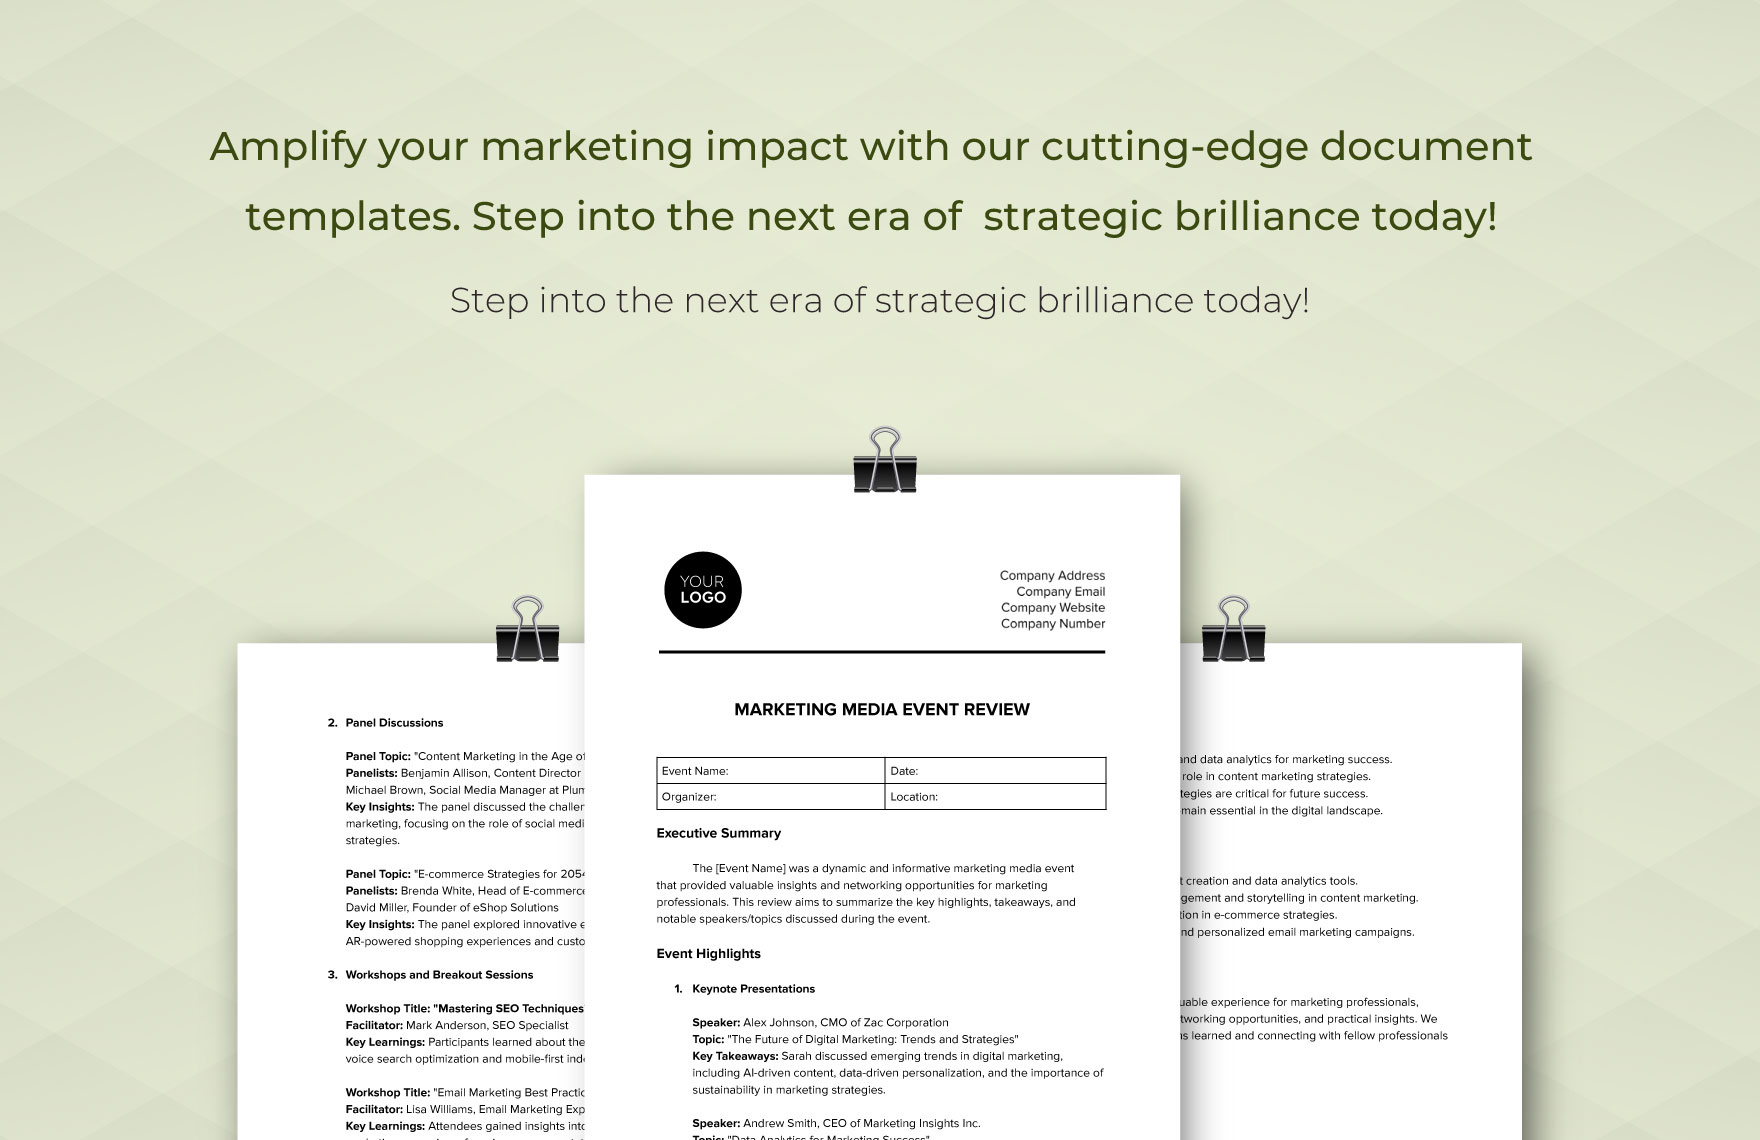 Marketing Media Event Review Template